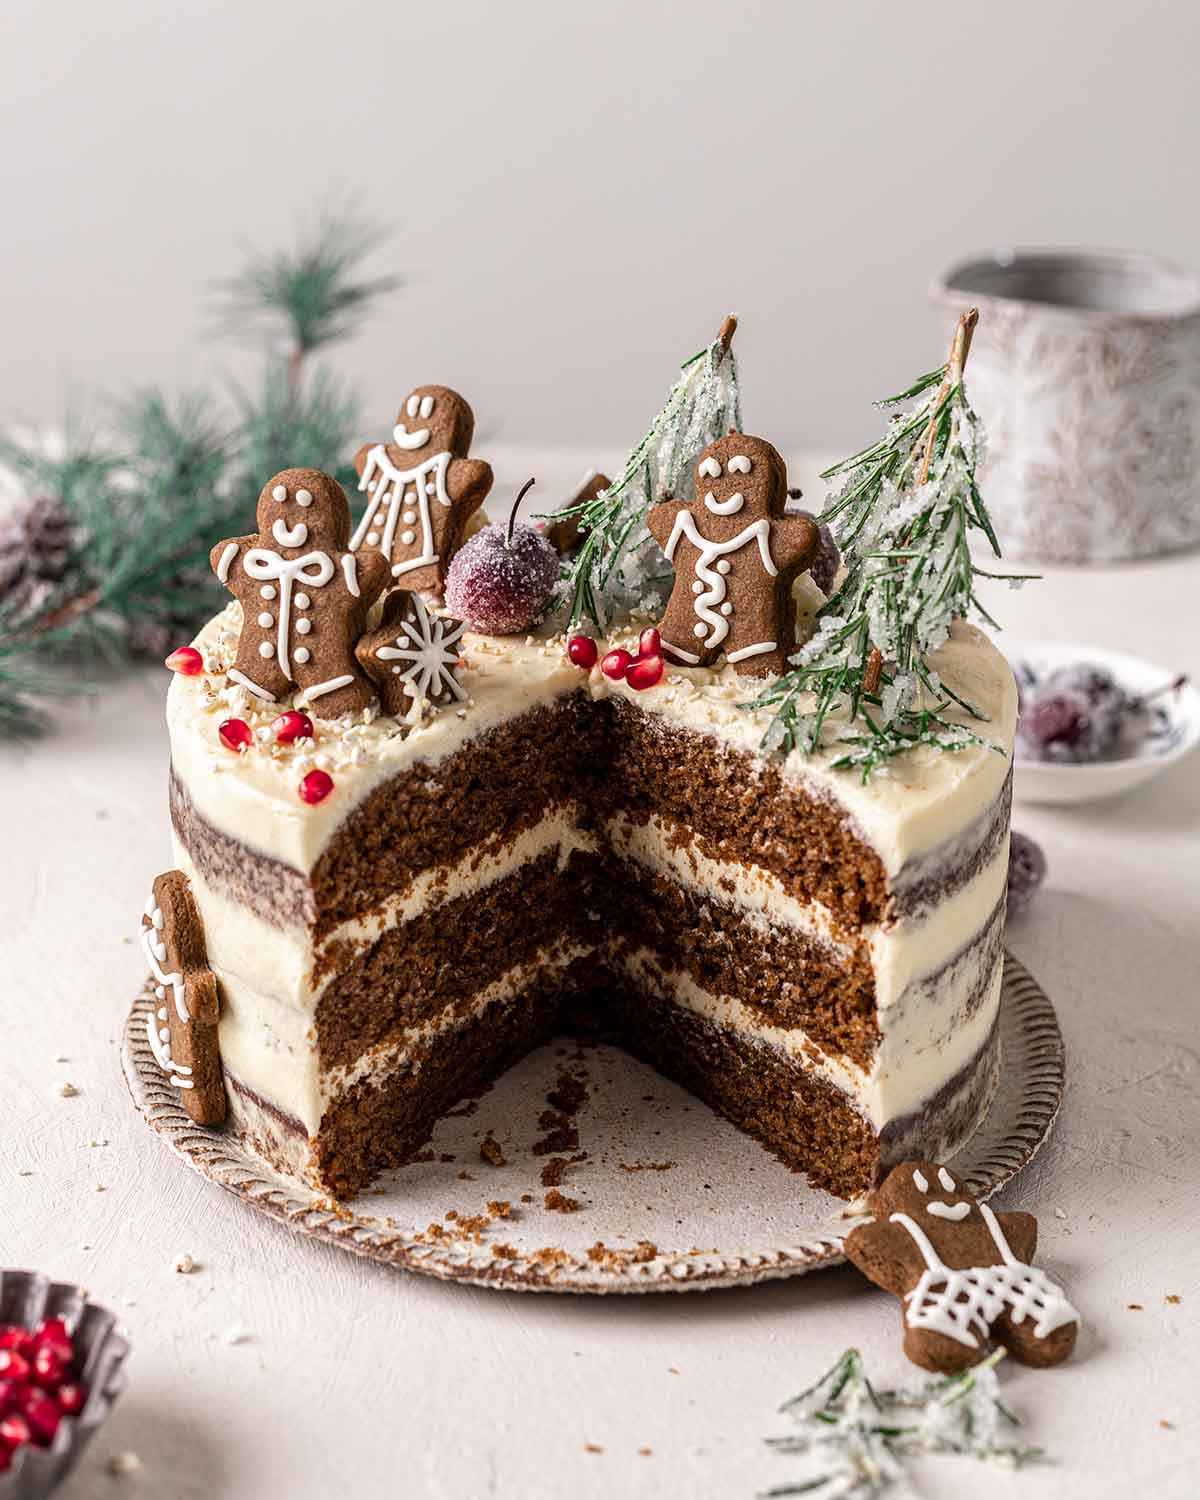 Gingerbread cake with slices taken out revealing large cross section of cake.